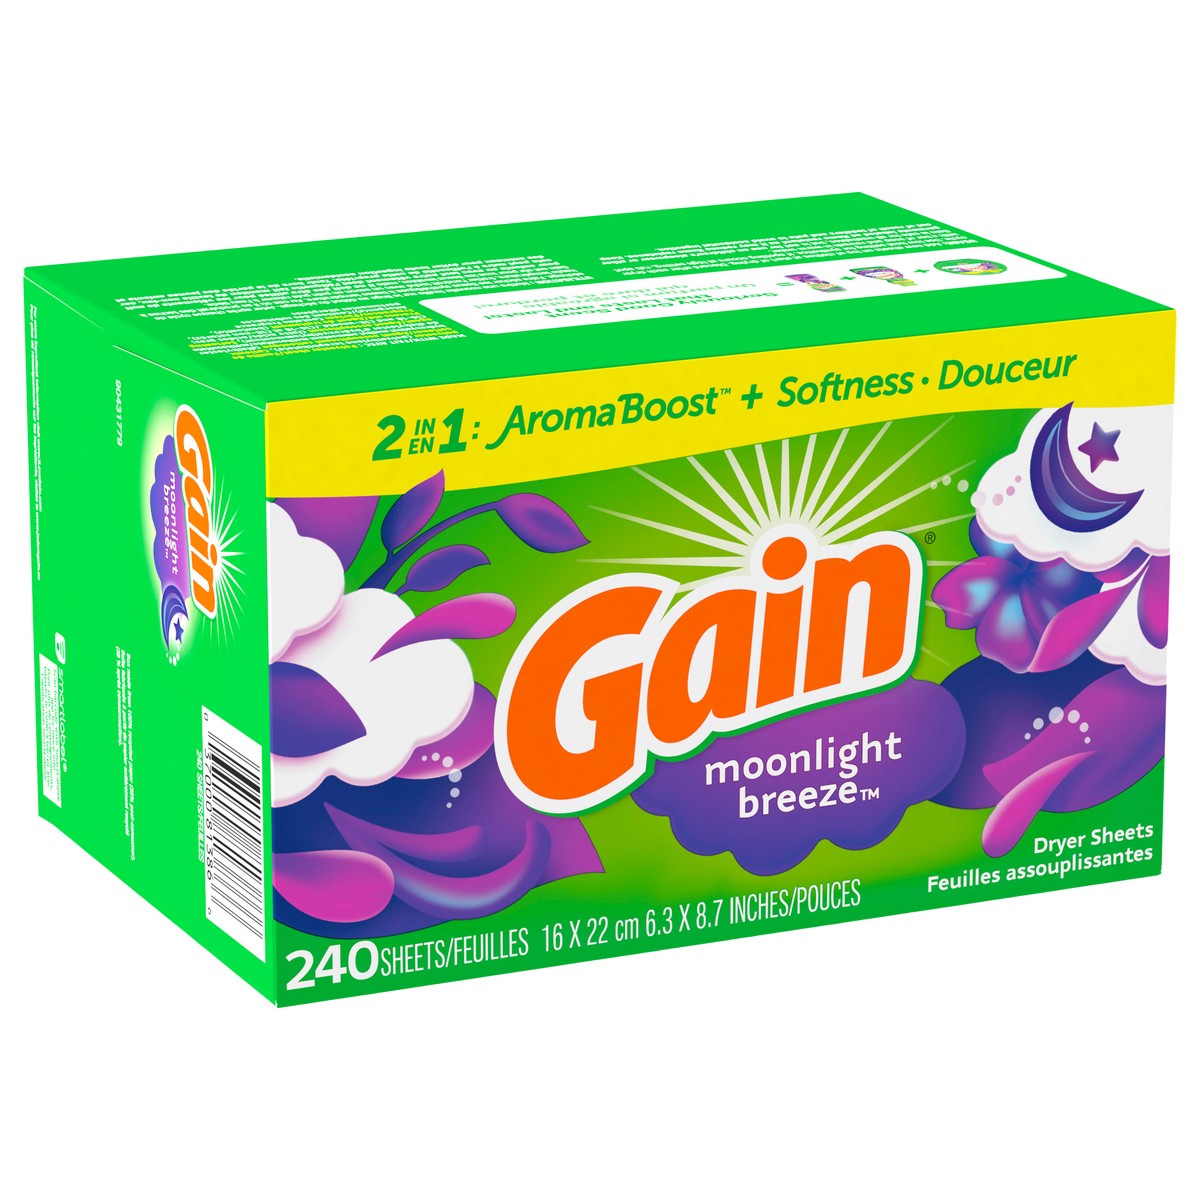 slide 5 of 12, Gain dryer sheets, 240 Count, Moonlight Breeze Scent Laundry Fabric Softener Sheets with 2-in-1 Aromaboost Plus Softness, 240 ct